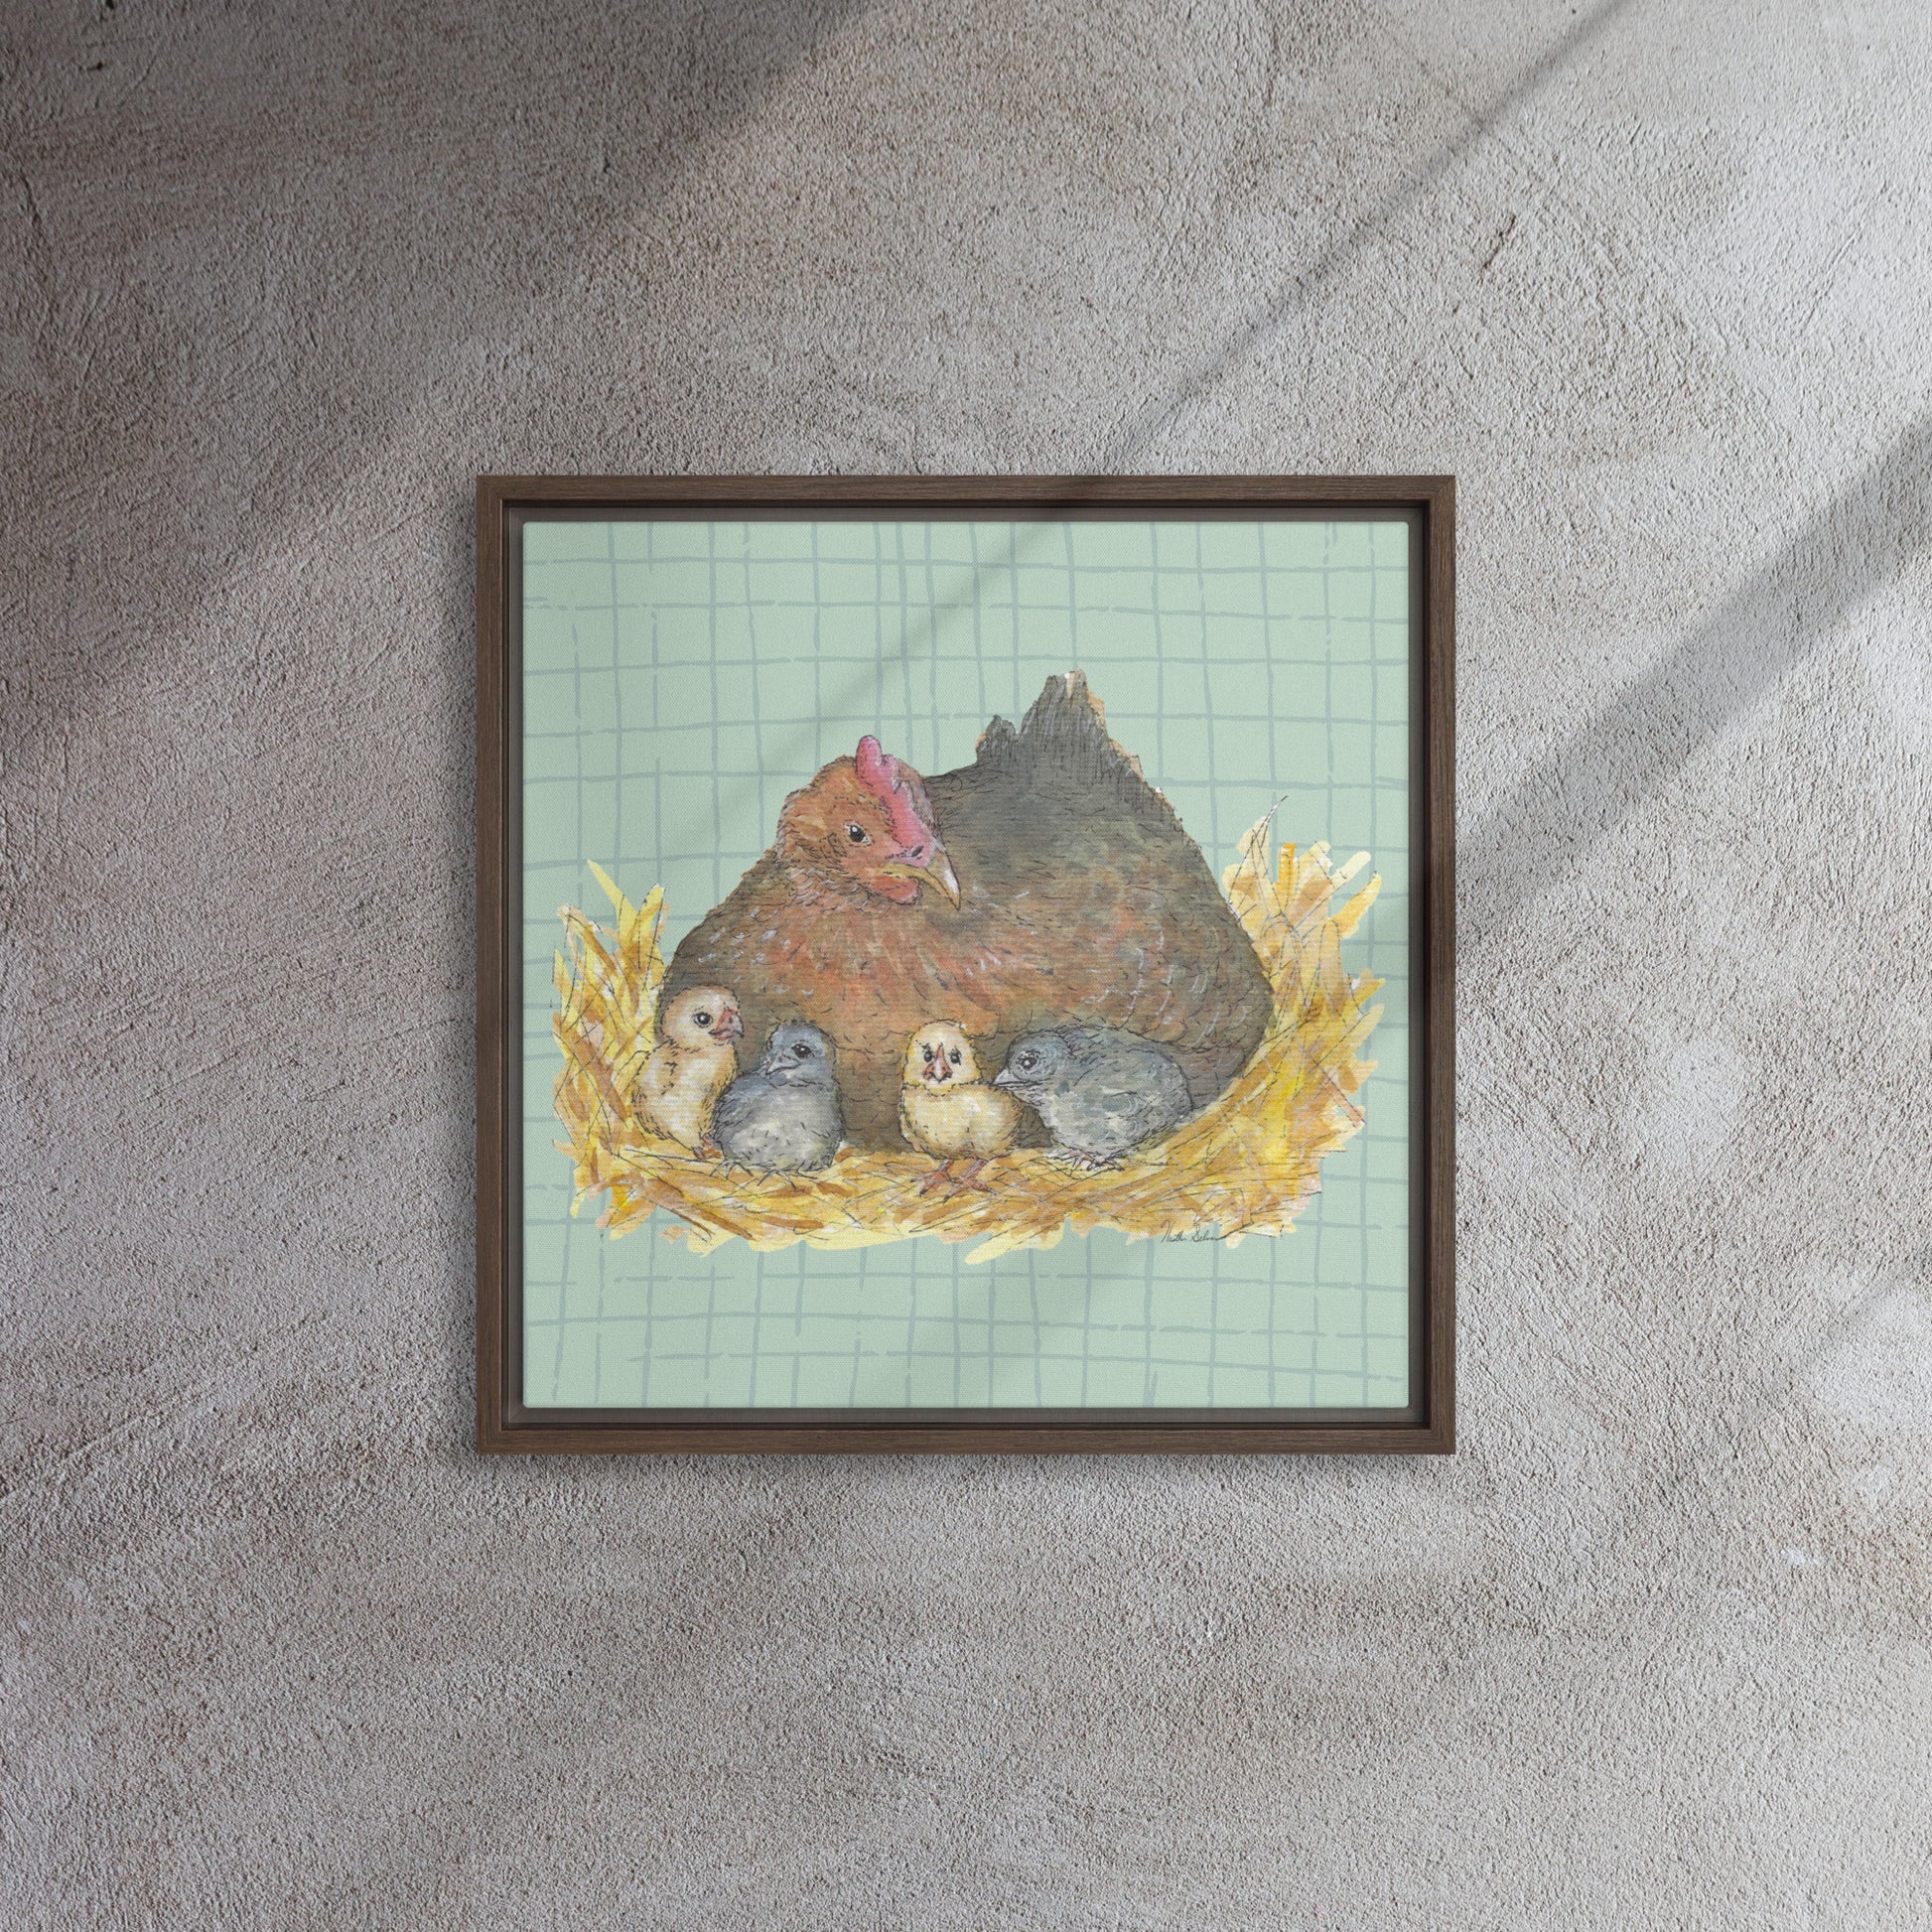 16 by 16 inch Mother Hen Floating Frame Canvas Wall Art. Heather Silver's watercolor painting, Mother Hen, with a green crosshatched background, printed on a stretched canvas and framed with a dark brown pine frame. Shown on carpet.